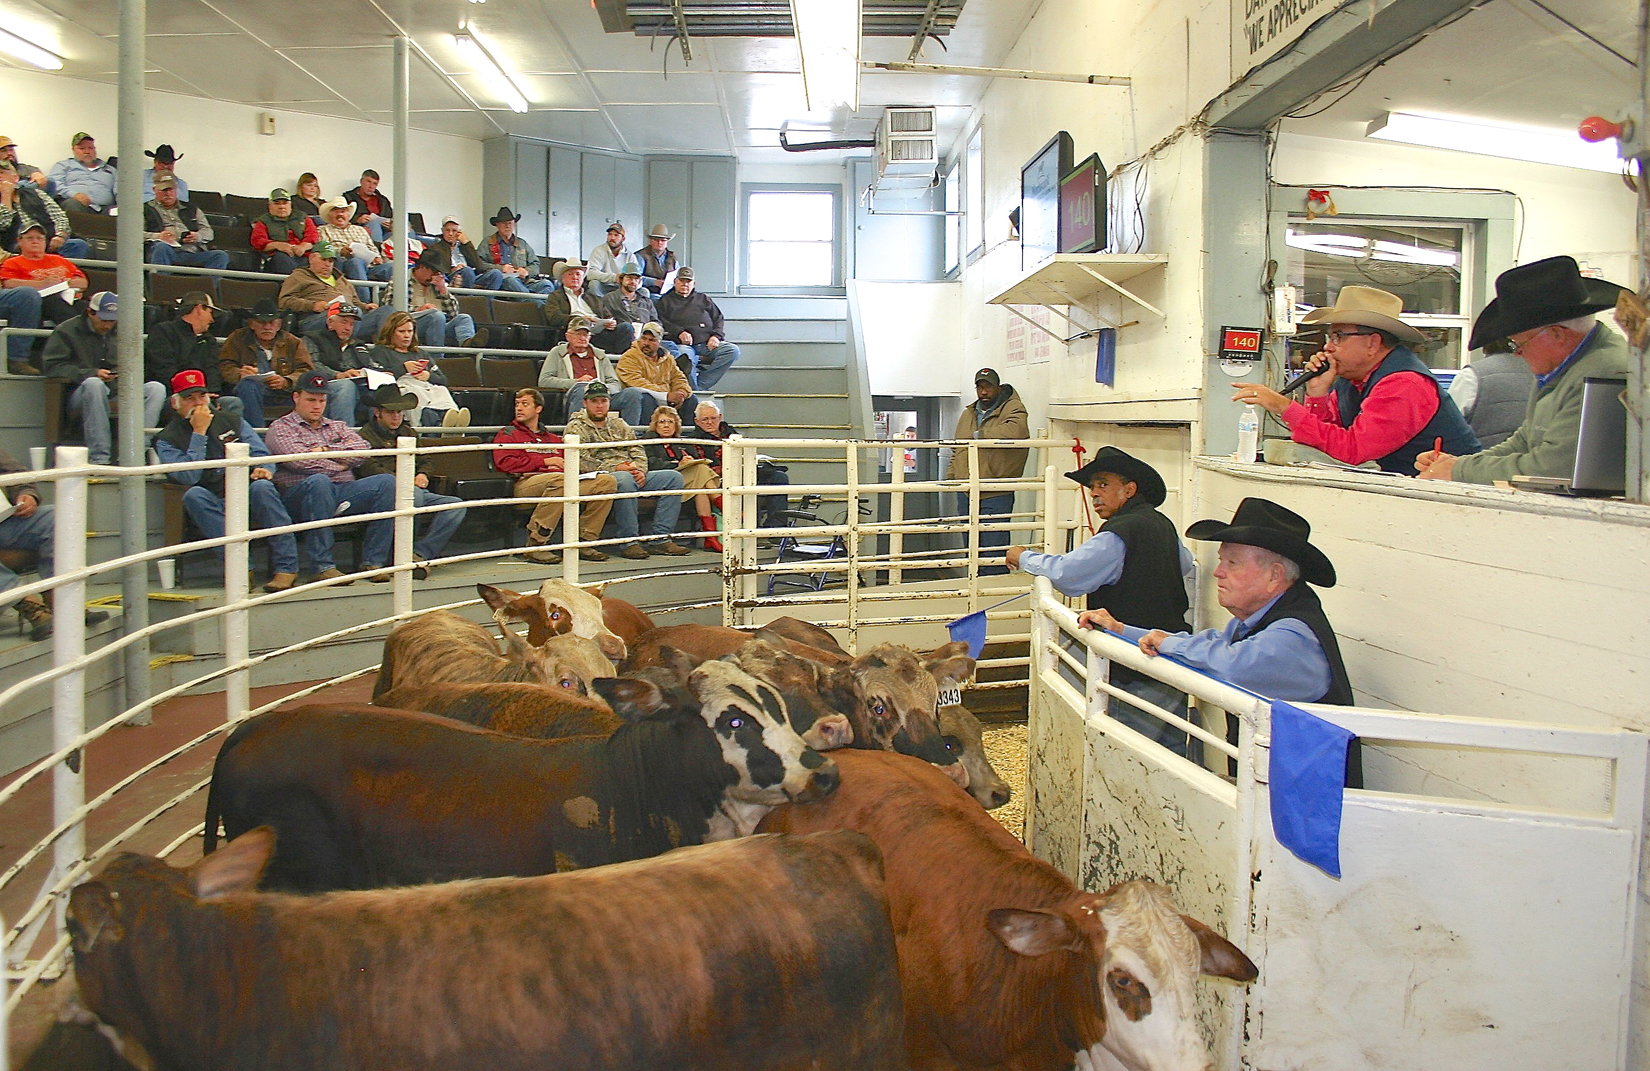 Producers Sell 5,555 Head of Pre-conditioned Cattle at the October Northeast Texas Beef Improvement Organization (NETBIO) Sale